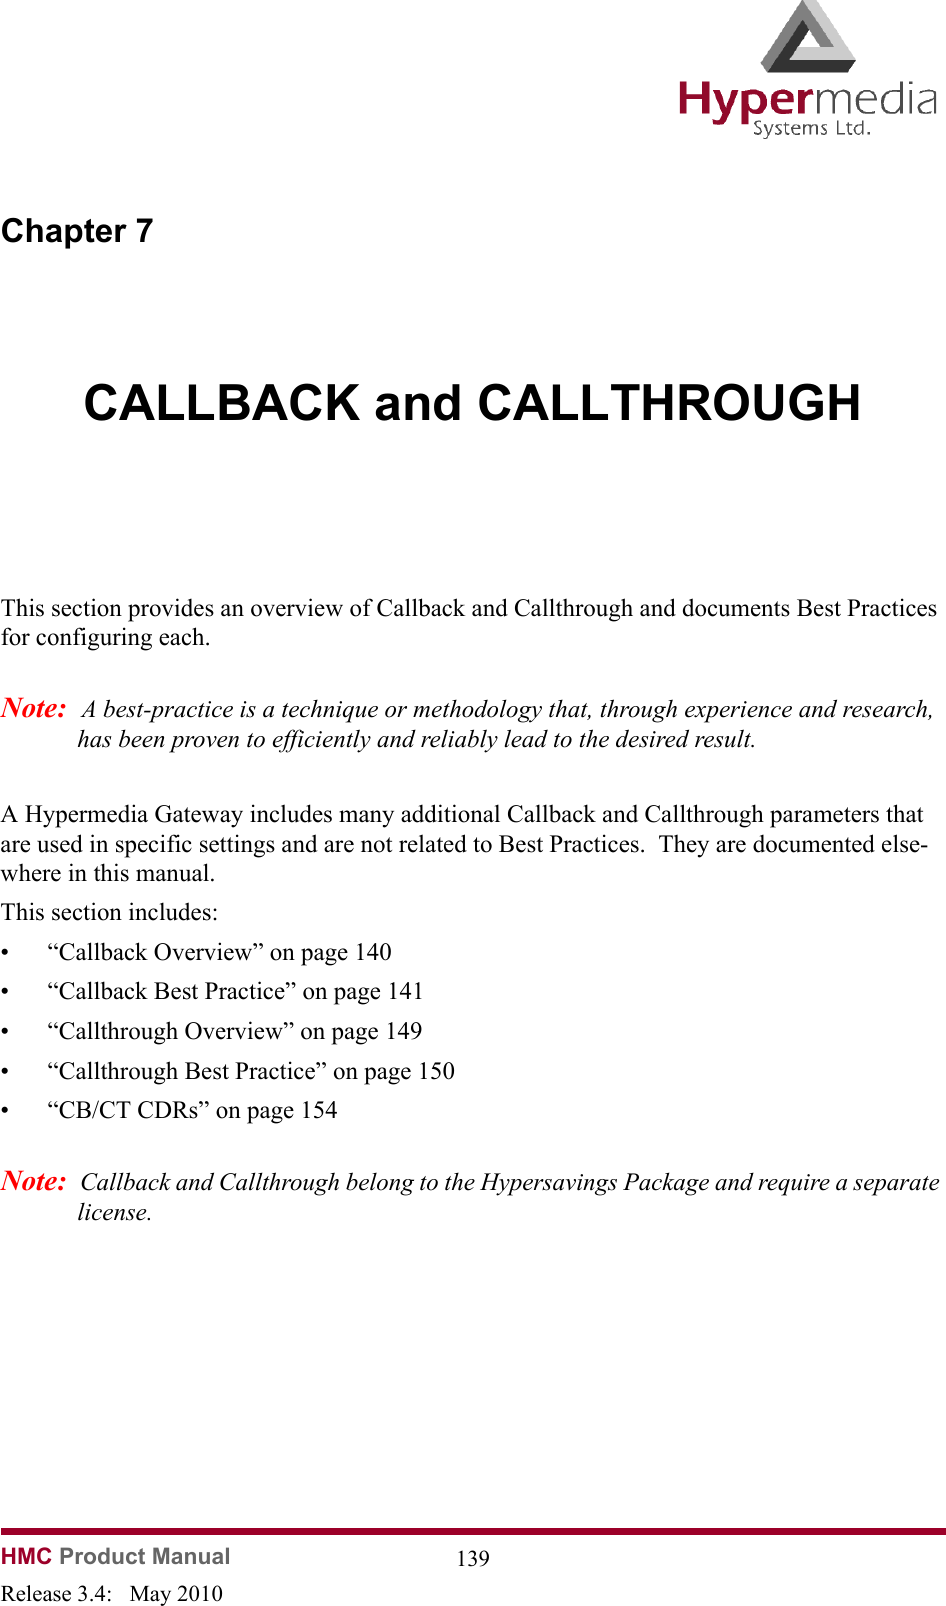 HMC Product Manual  139Release 3.4:   May 2010Chapter 7CALLBACK and CALLTHROUGHThis section provides an overview of Callback and Callthrough and documents Best Practices for configuring each.  Note:  A best-practice is a technique or methodology that, through experience and research, has been proven to efficiently and reliably lead to the desired result.A Hypermedia Gateway includes many additional Callback and Callthrough parameters that are used in specific settings and are not related to Best Practices.  They are documented else-where in this manual.This section includes:• “Callback Overview” on page 140• “Callback Best Practice” on page 141• “Callthrough Overview” on page 149• “Callthrough Best Practice” on page 150• “CB/CT CDRs” on page 154Note:  Callback and Callthrough belong to the Hypersavings Package and require a separate license.